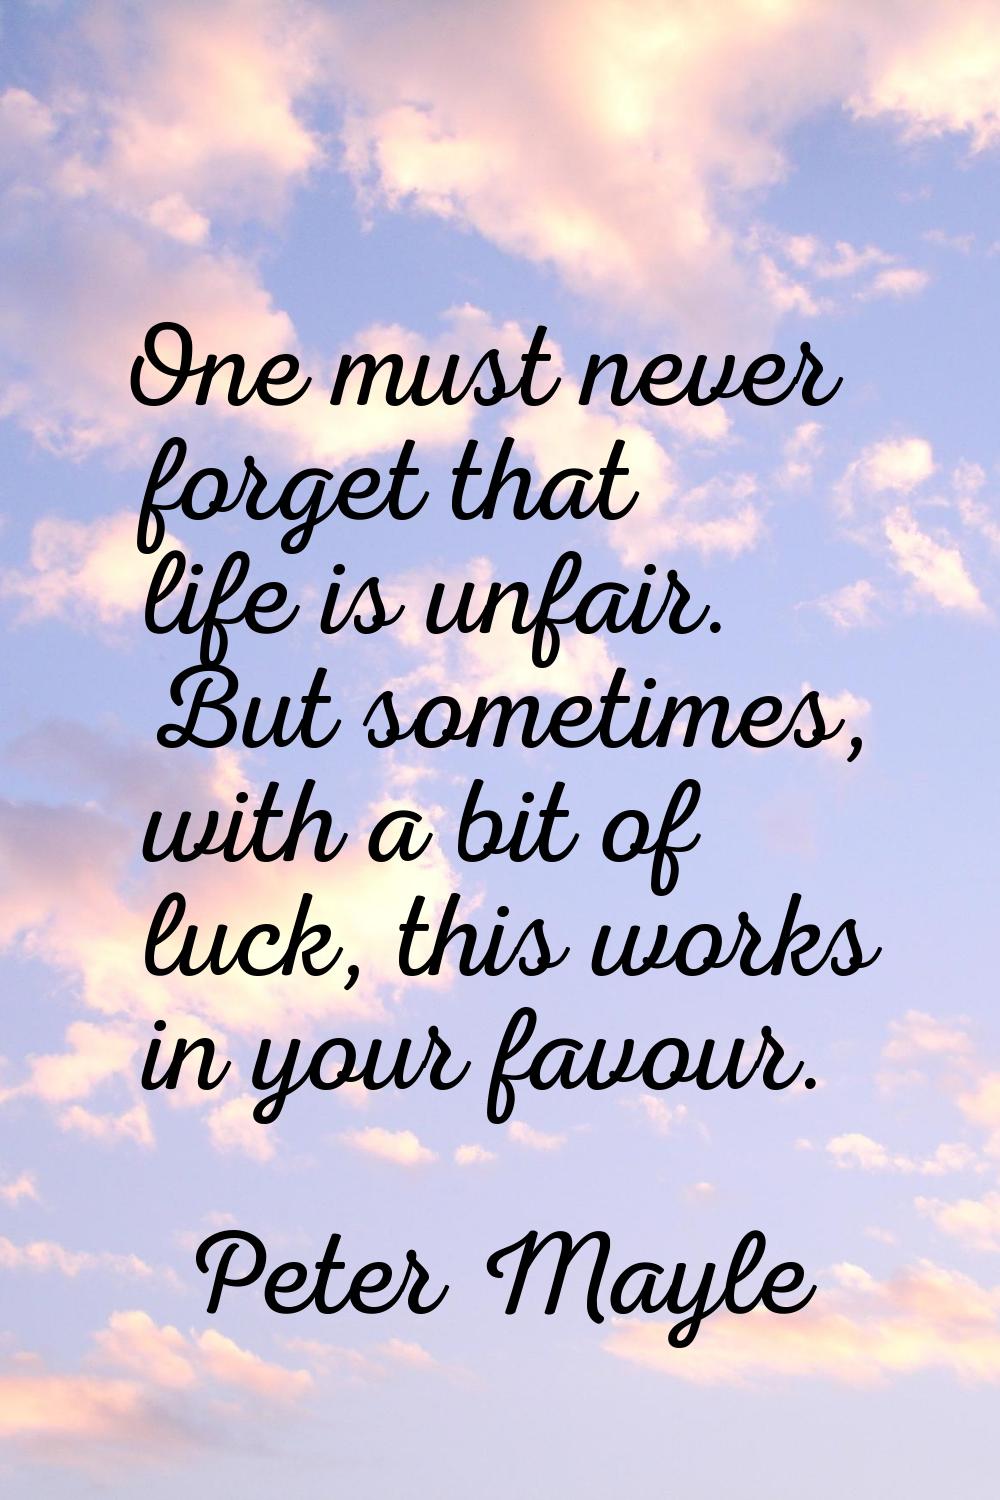 One must never forget that life is unfair. But sometimes, with a bit of luck, this works in your fa